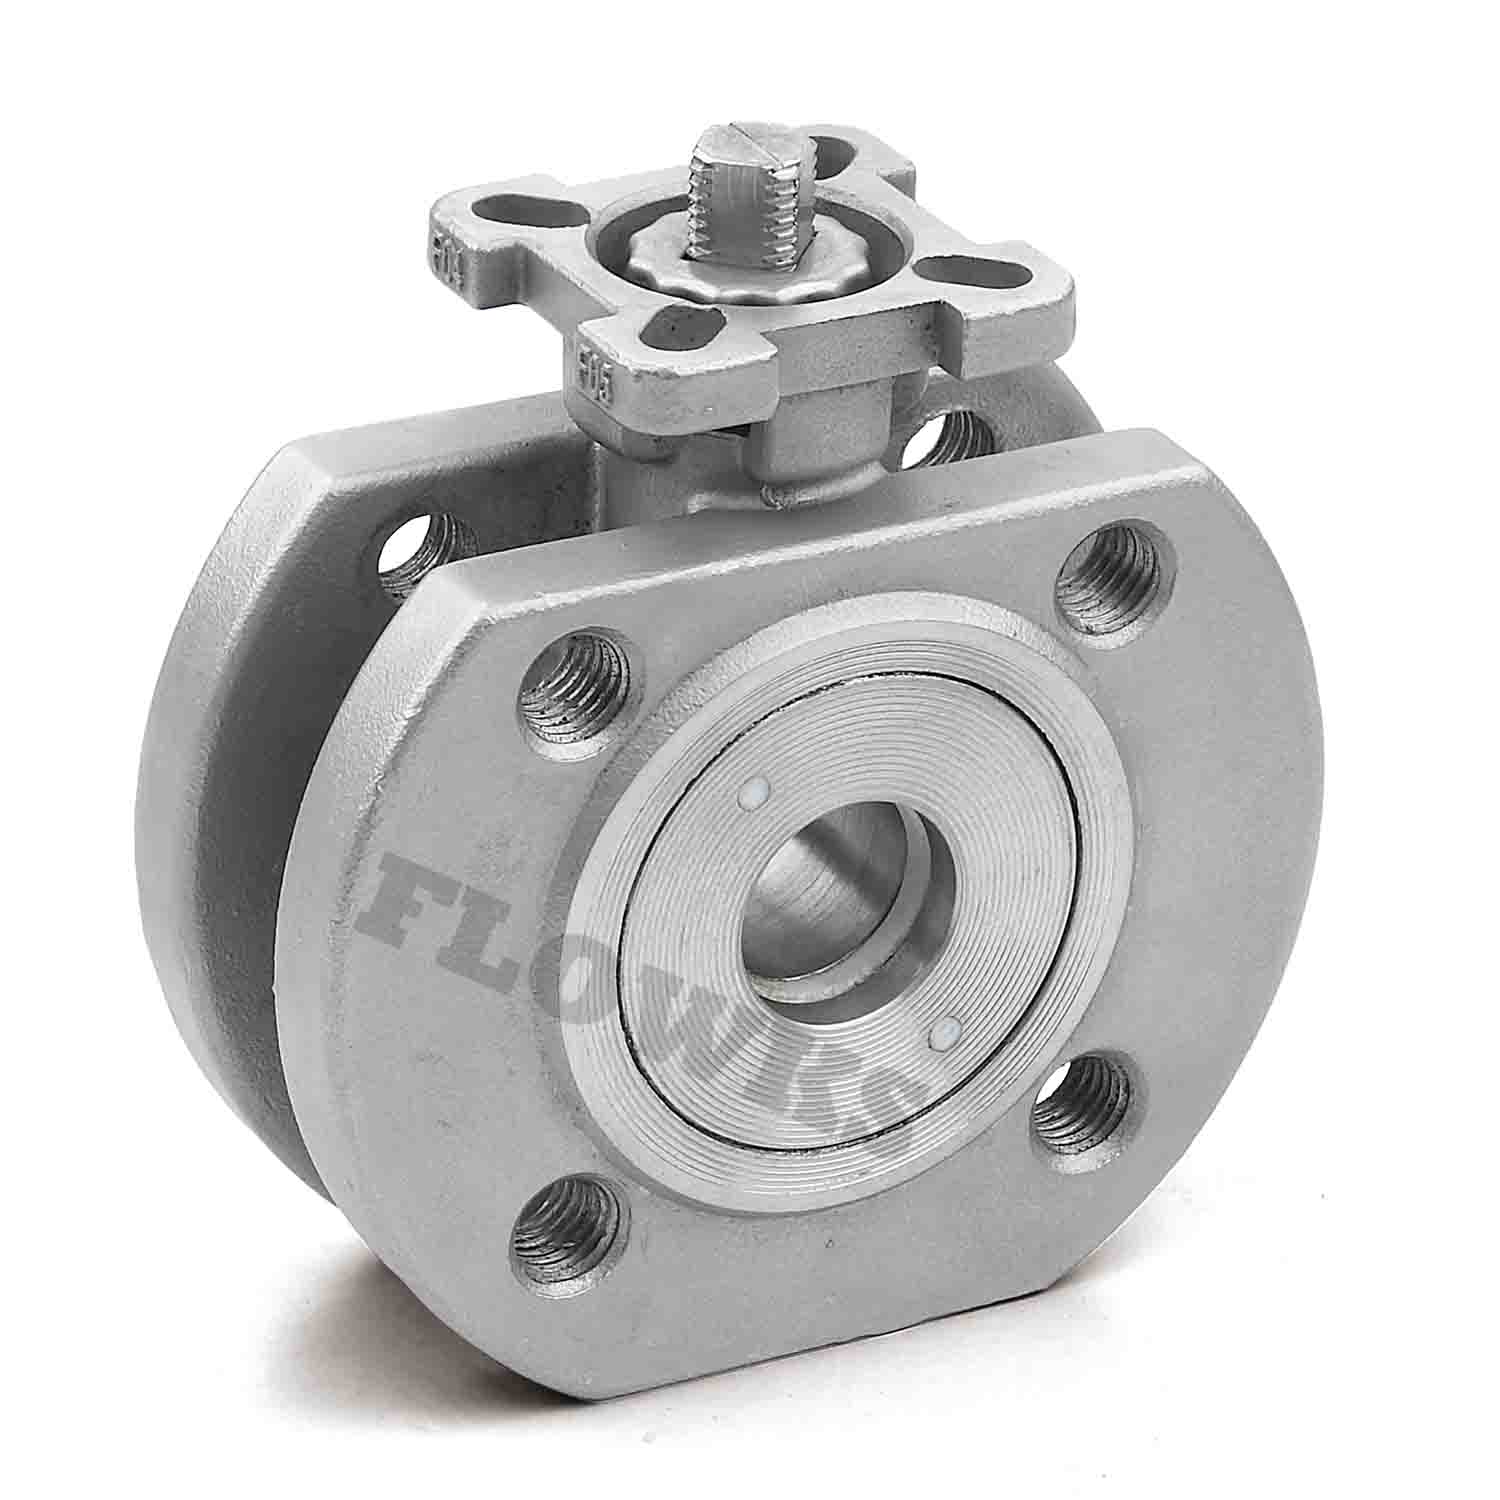 Wafer Ball Valve with ISO Mounting Pad